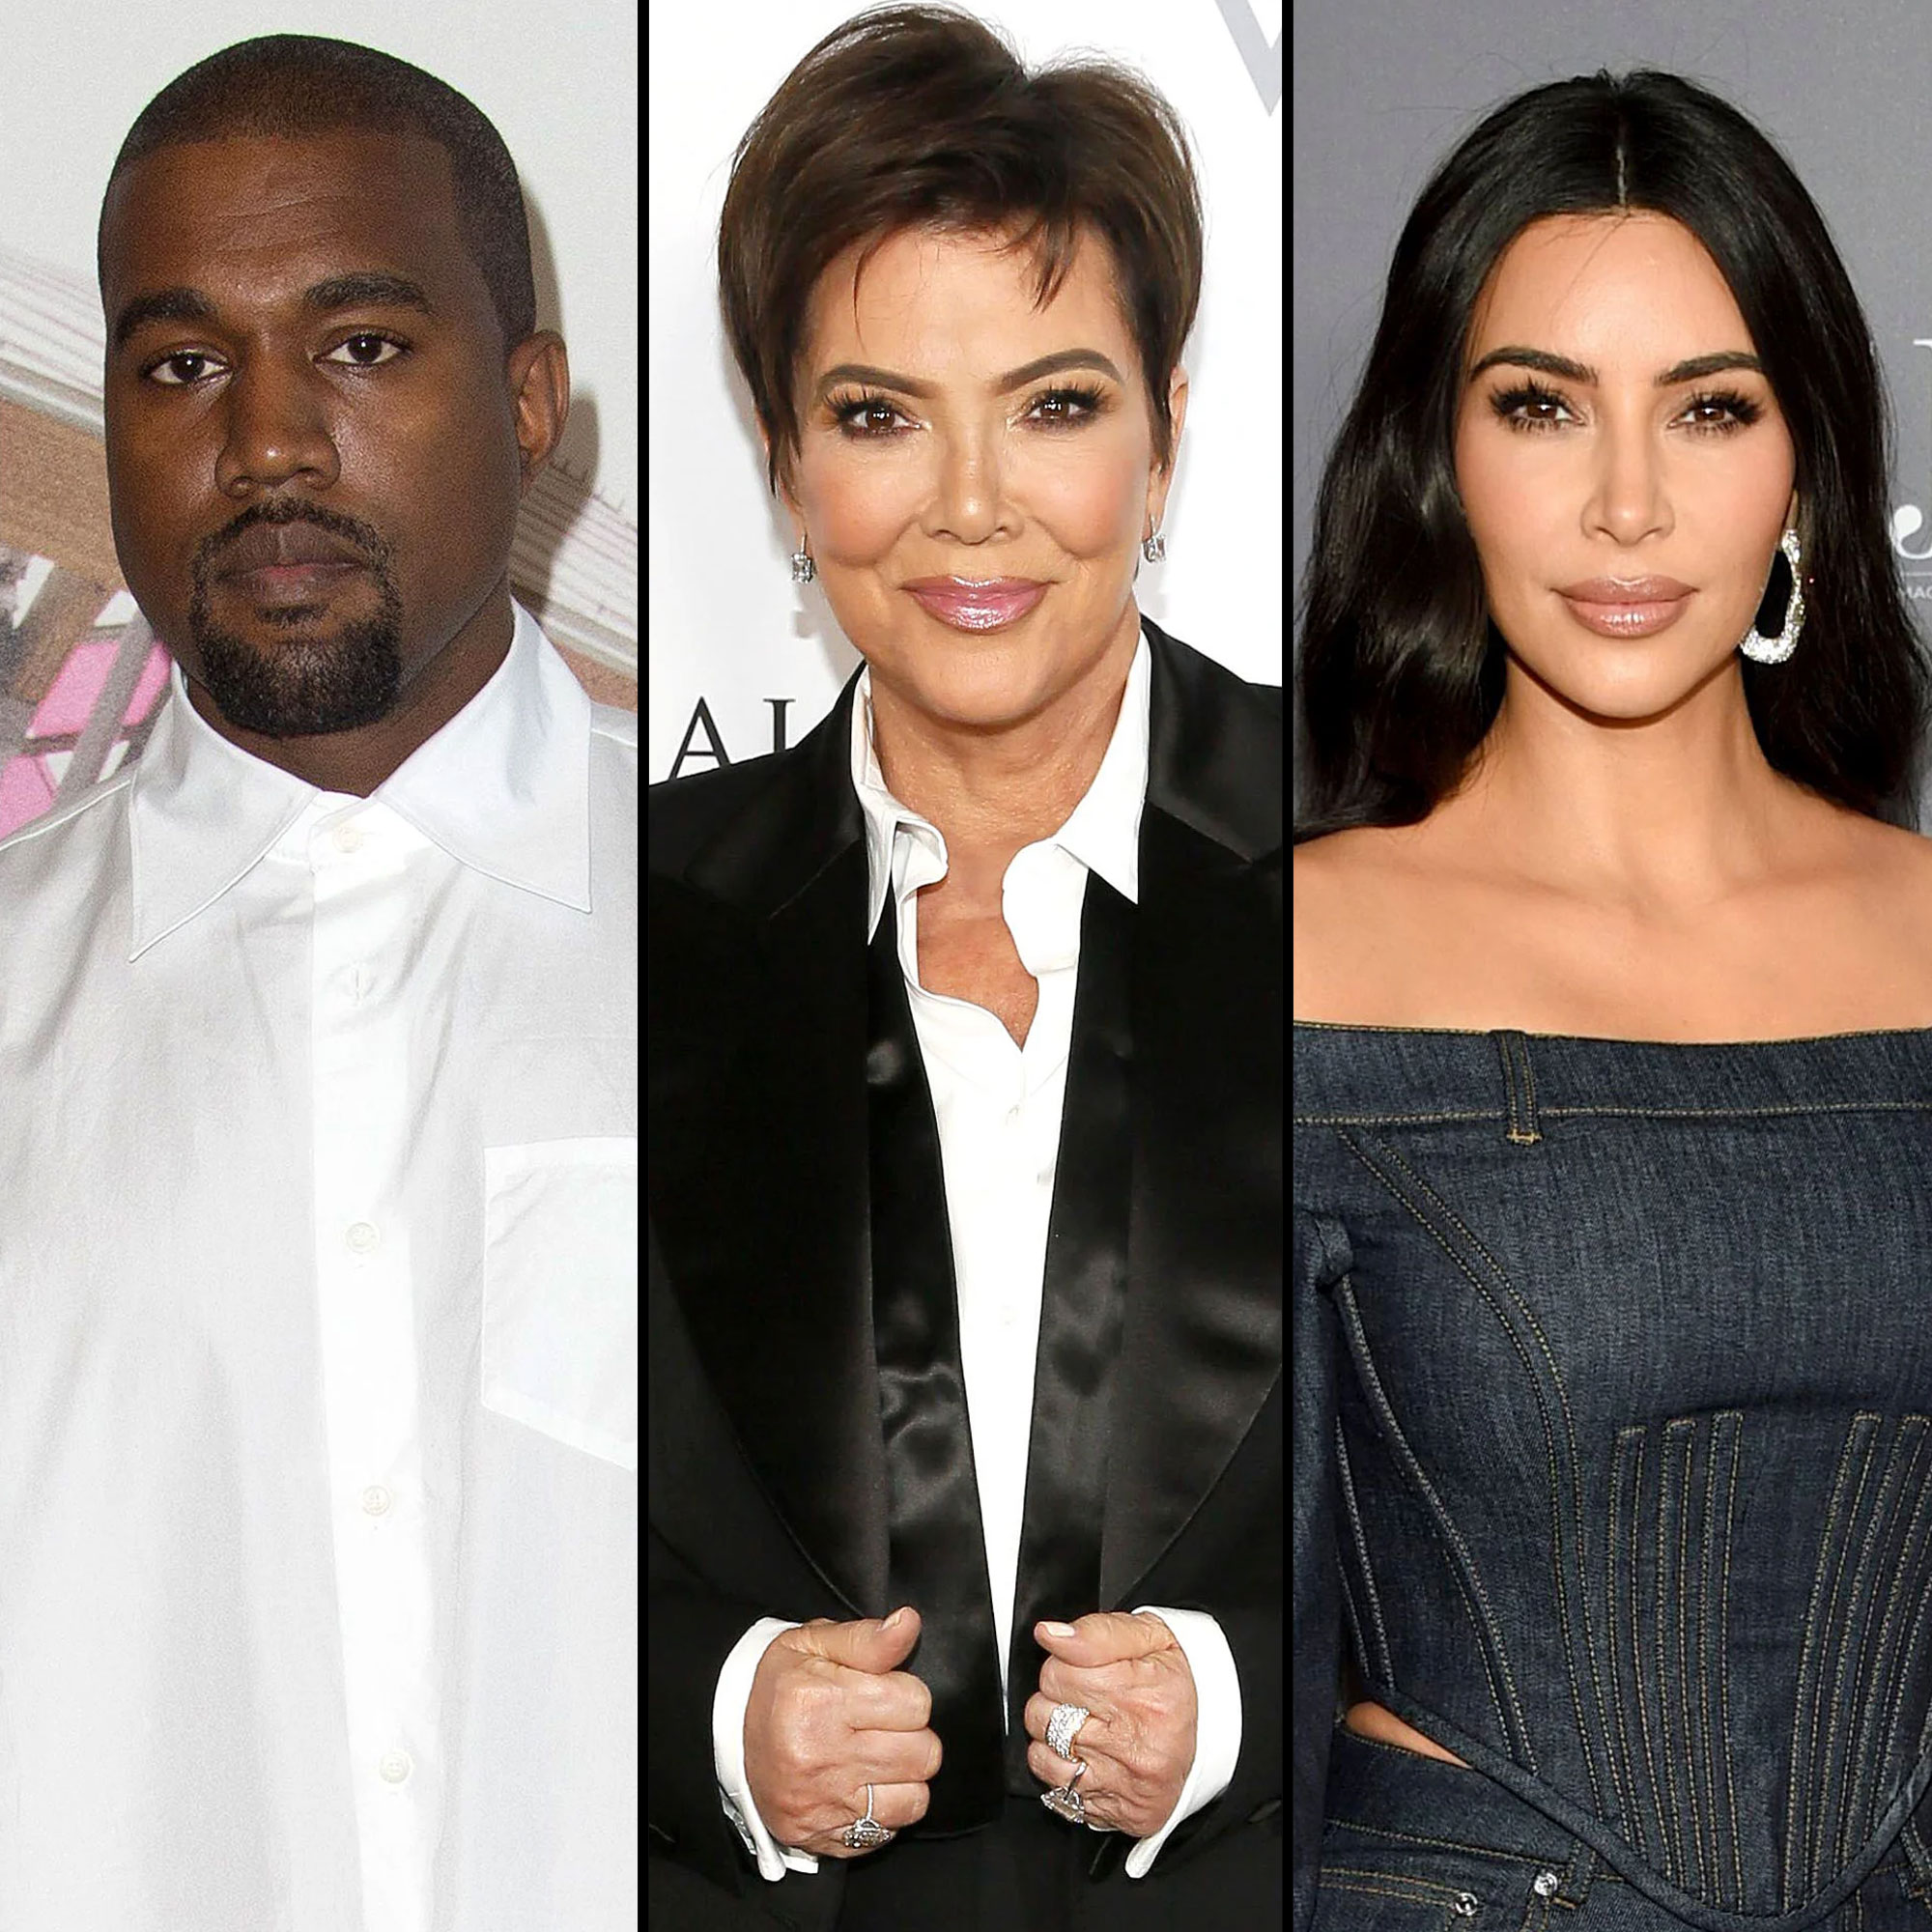 Caty Cole Sex - Kanye West Calls Out Kris Jenner, Claims Porn 'Destroyed' Family